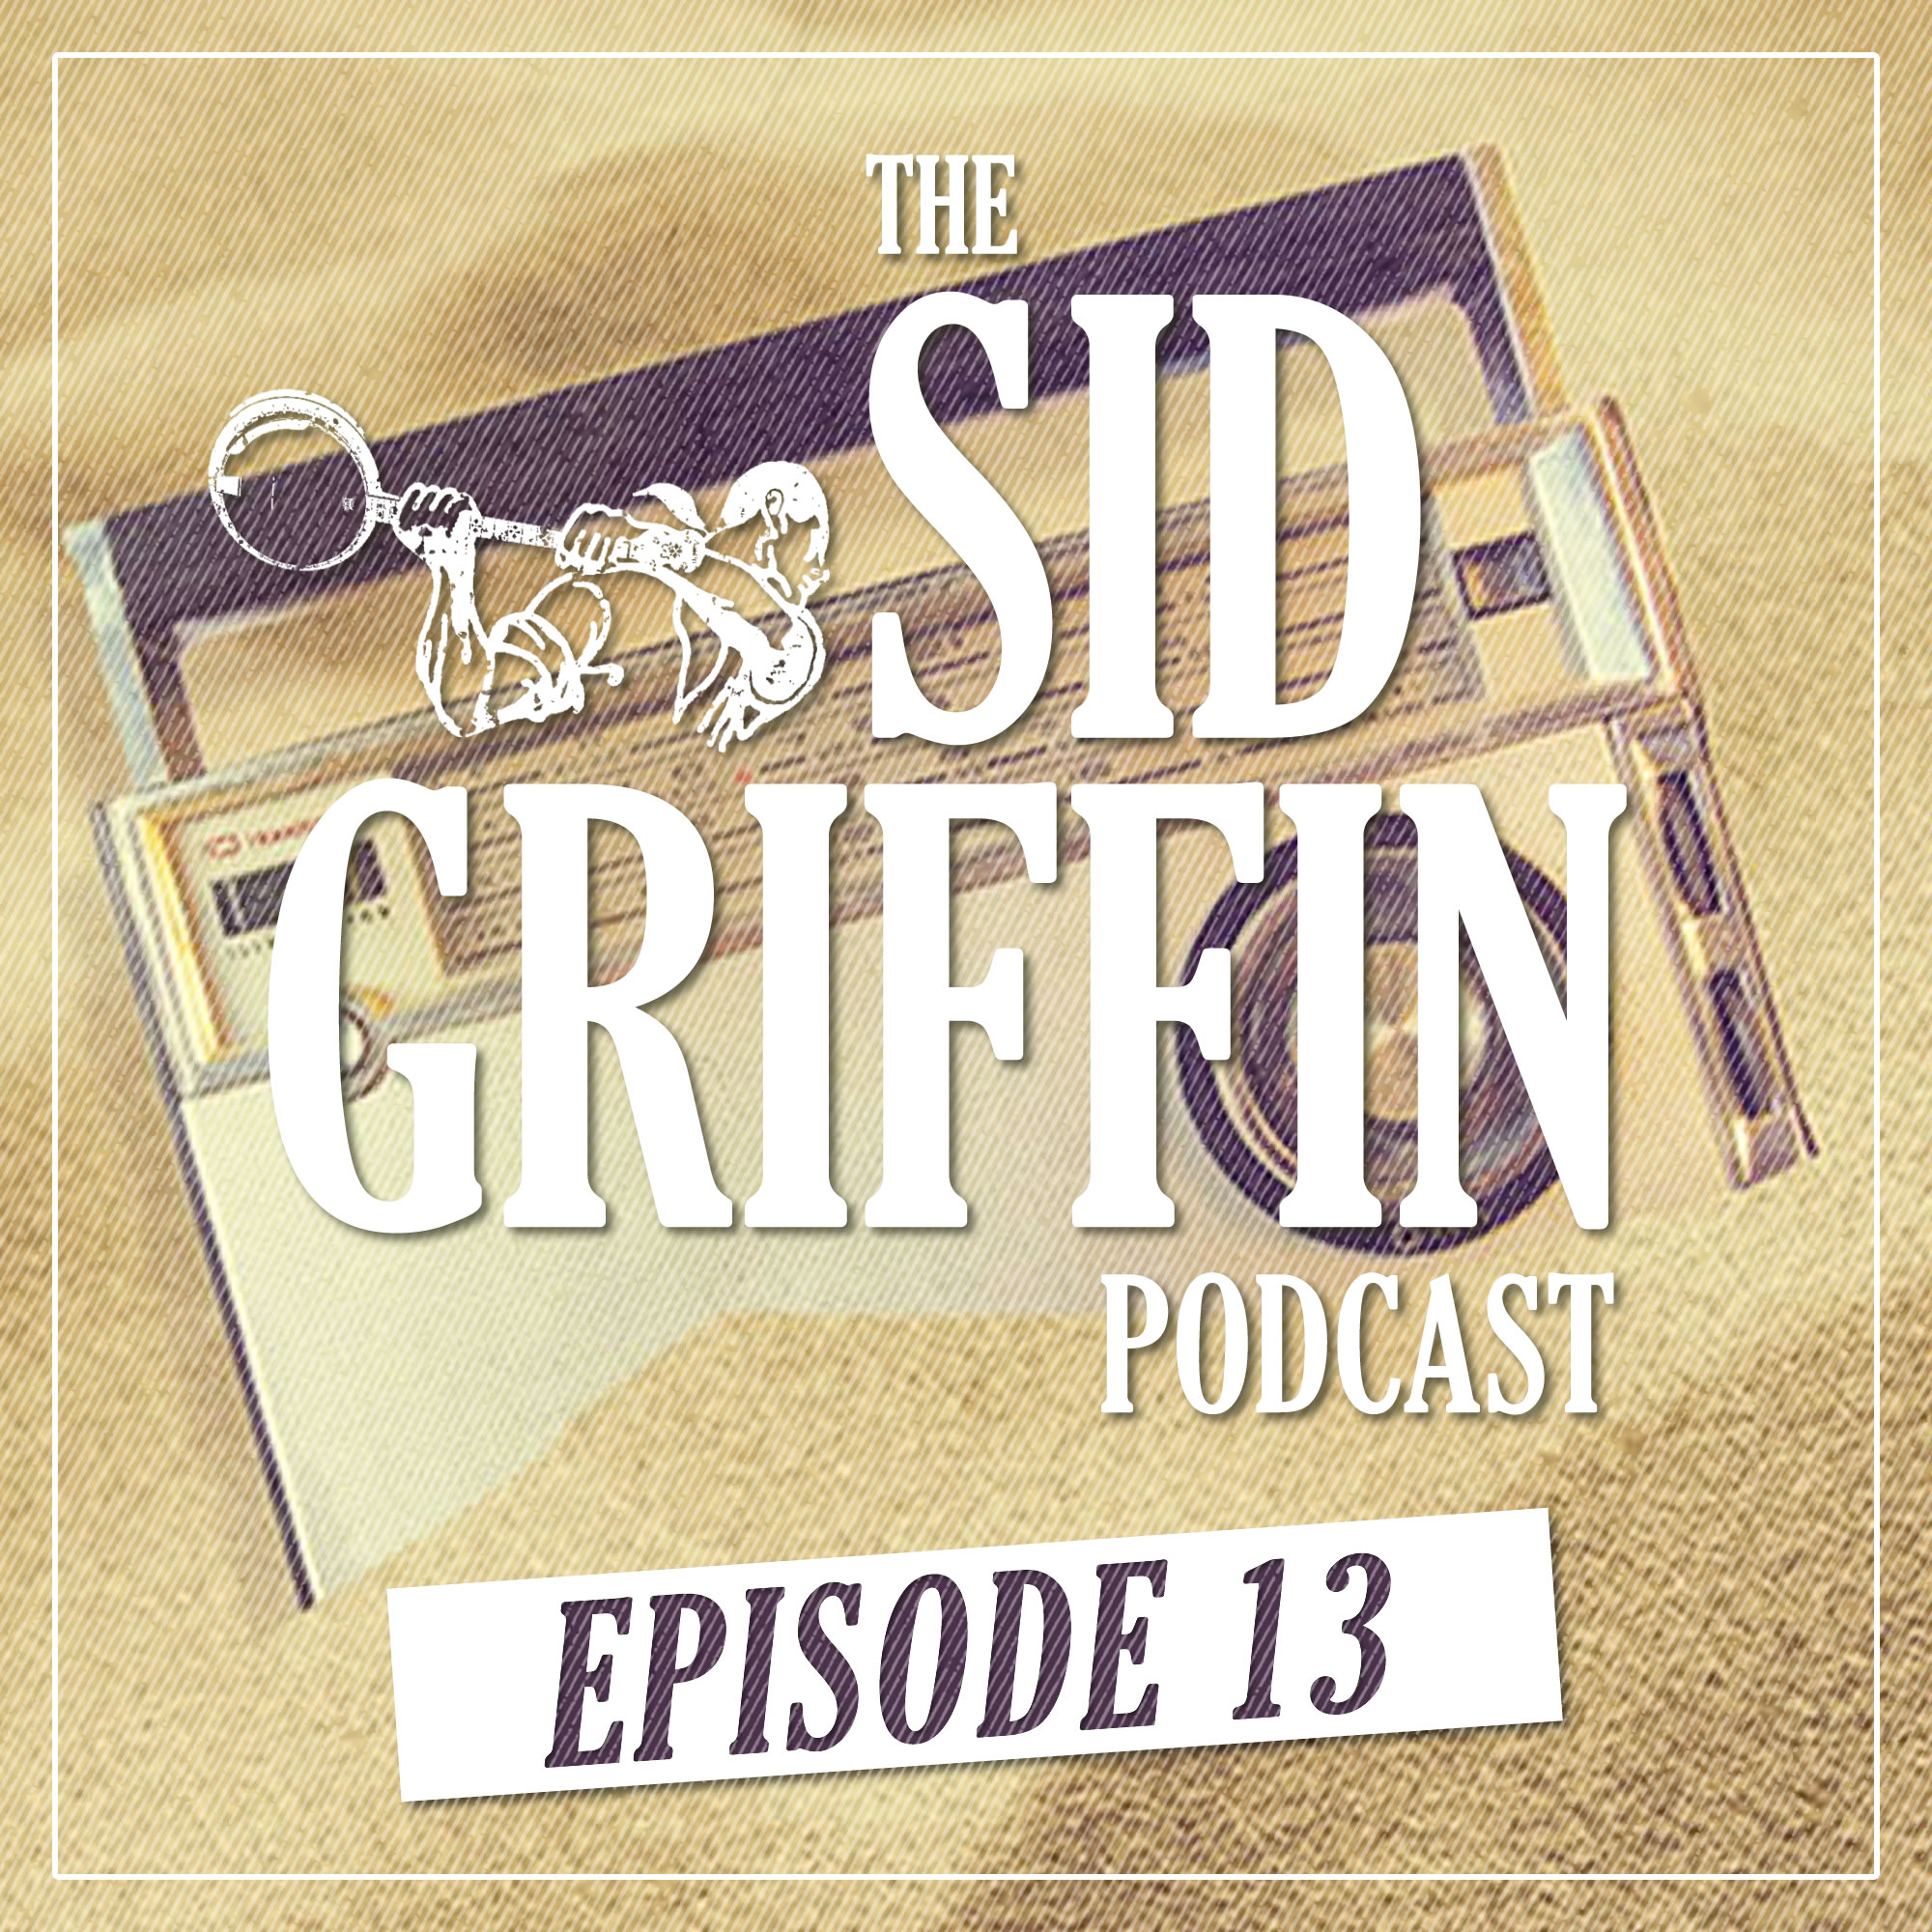  Call All Coal Porters, The Sid Griffin Podcast - No.13 